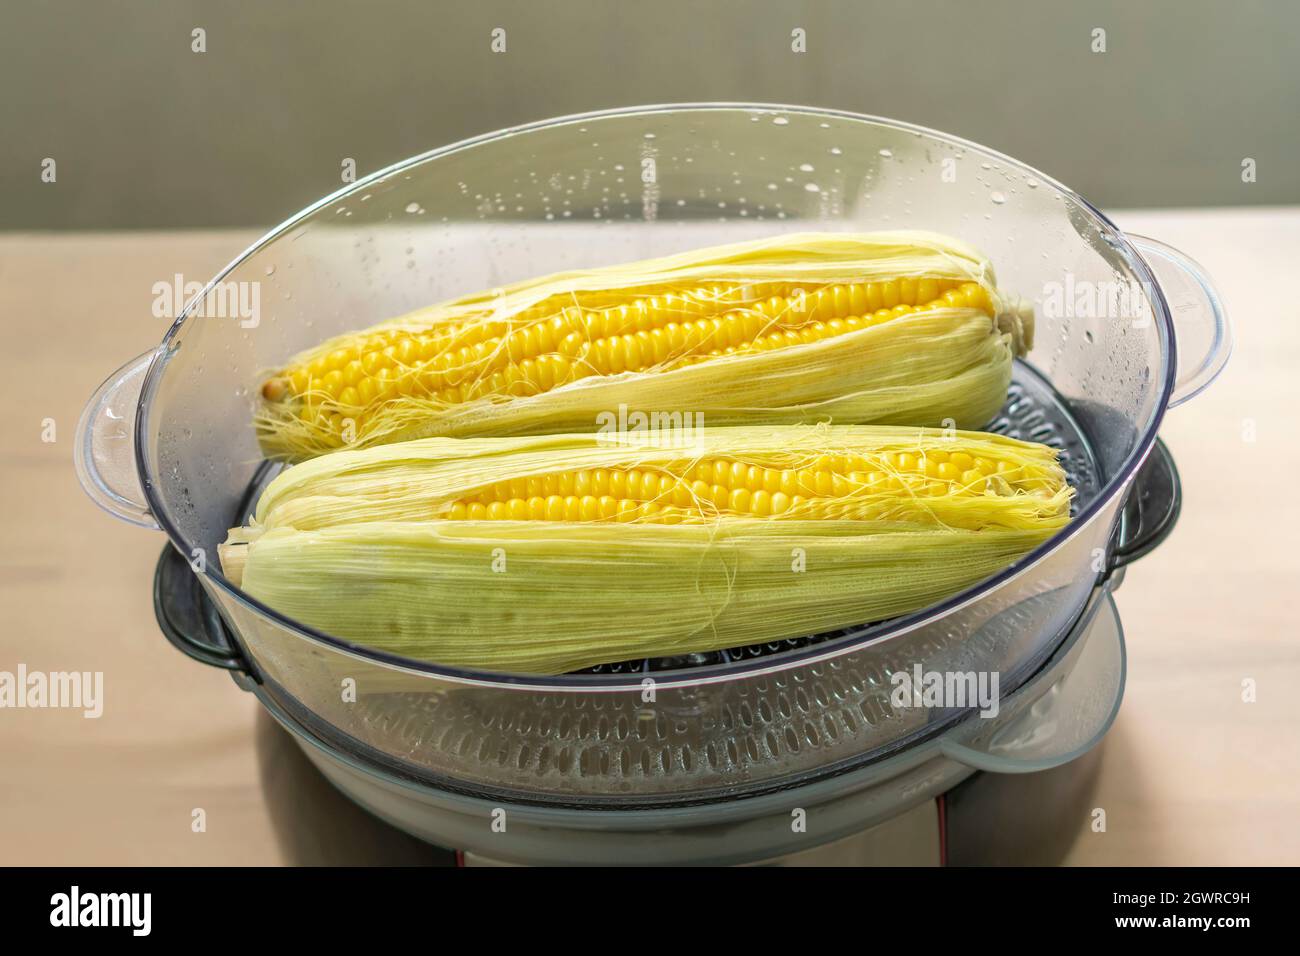 Close-up Of Corn On The Cob In A Steamer Stock Photo